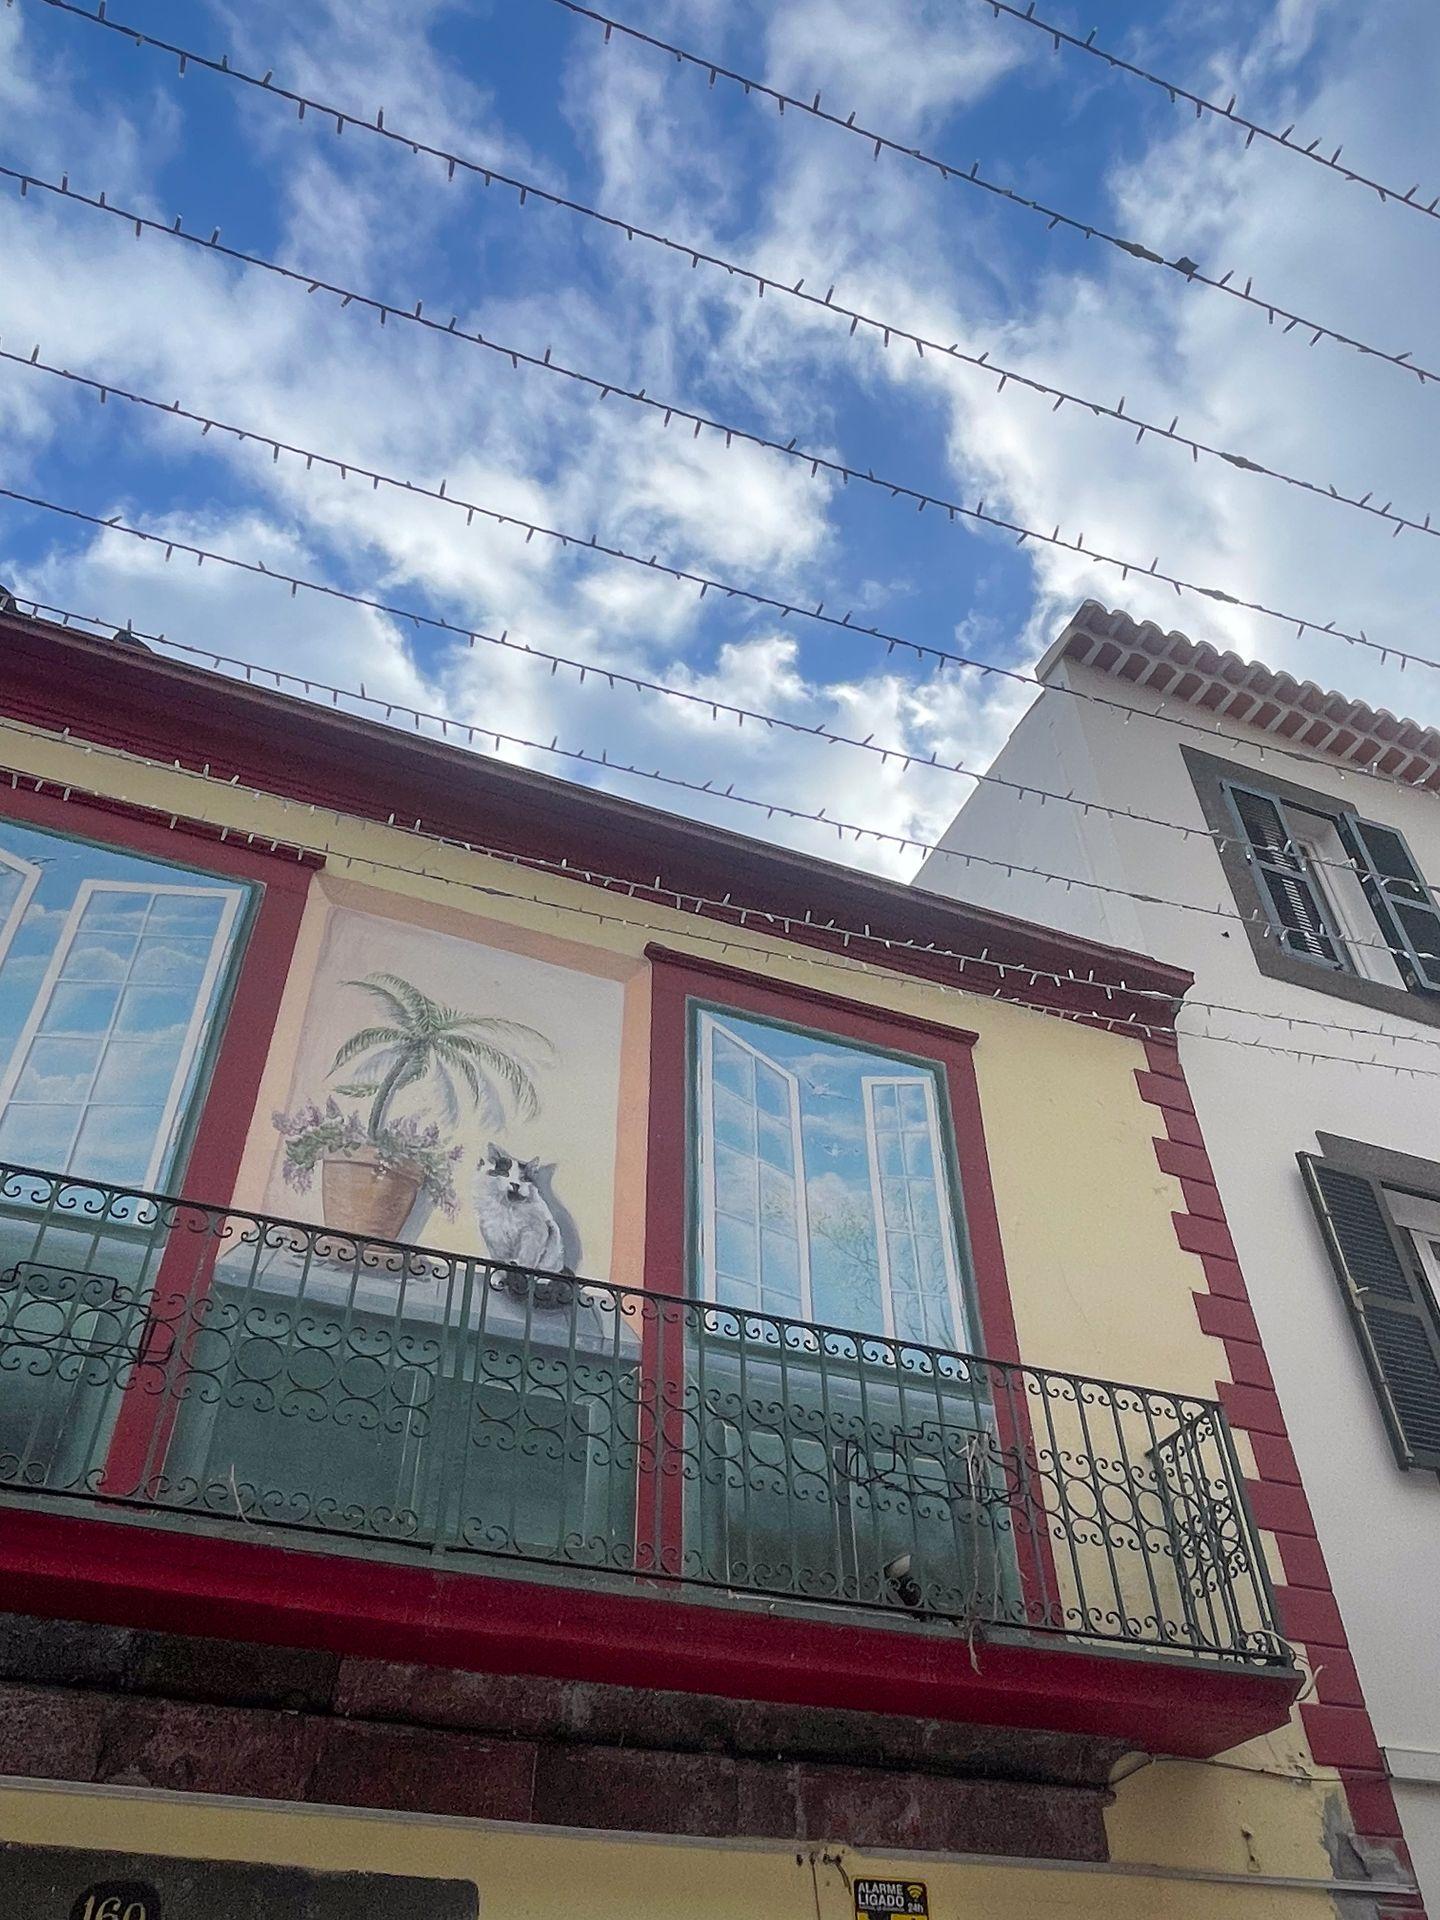 Looking up at a balcony with a cat painted on the building.